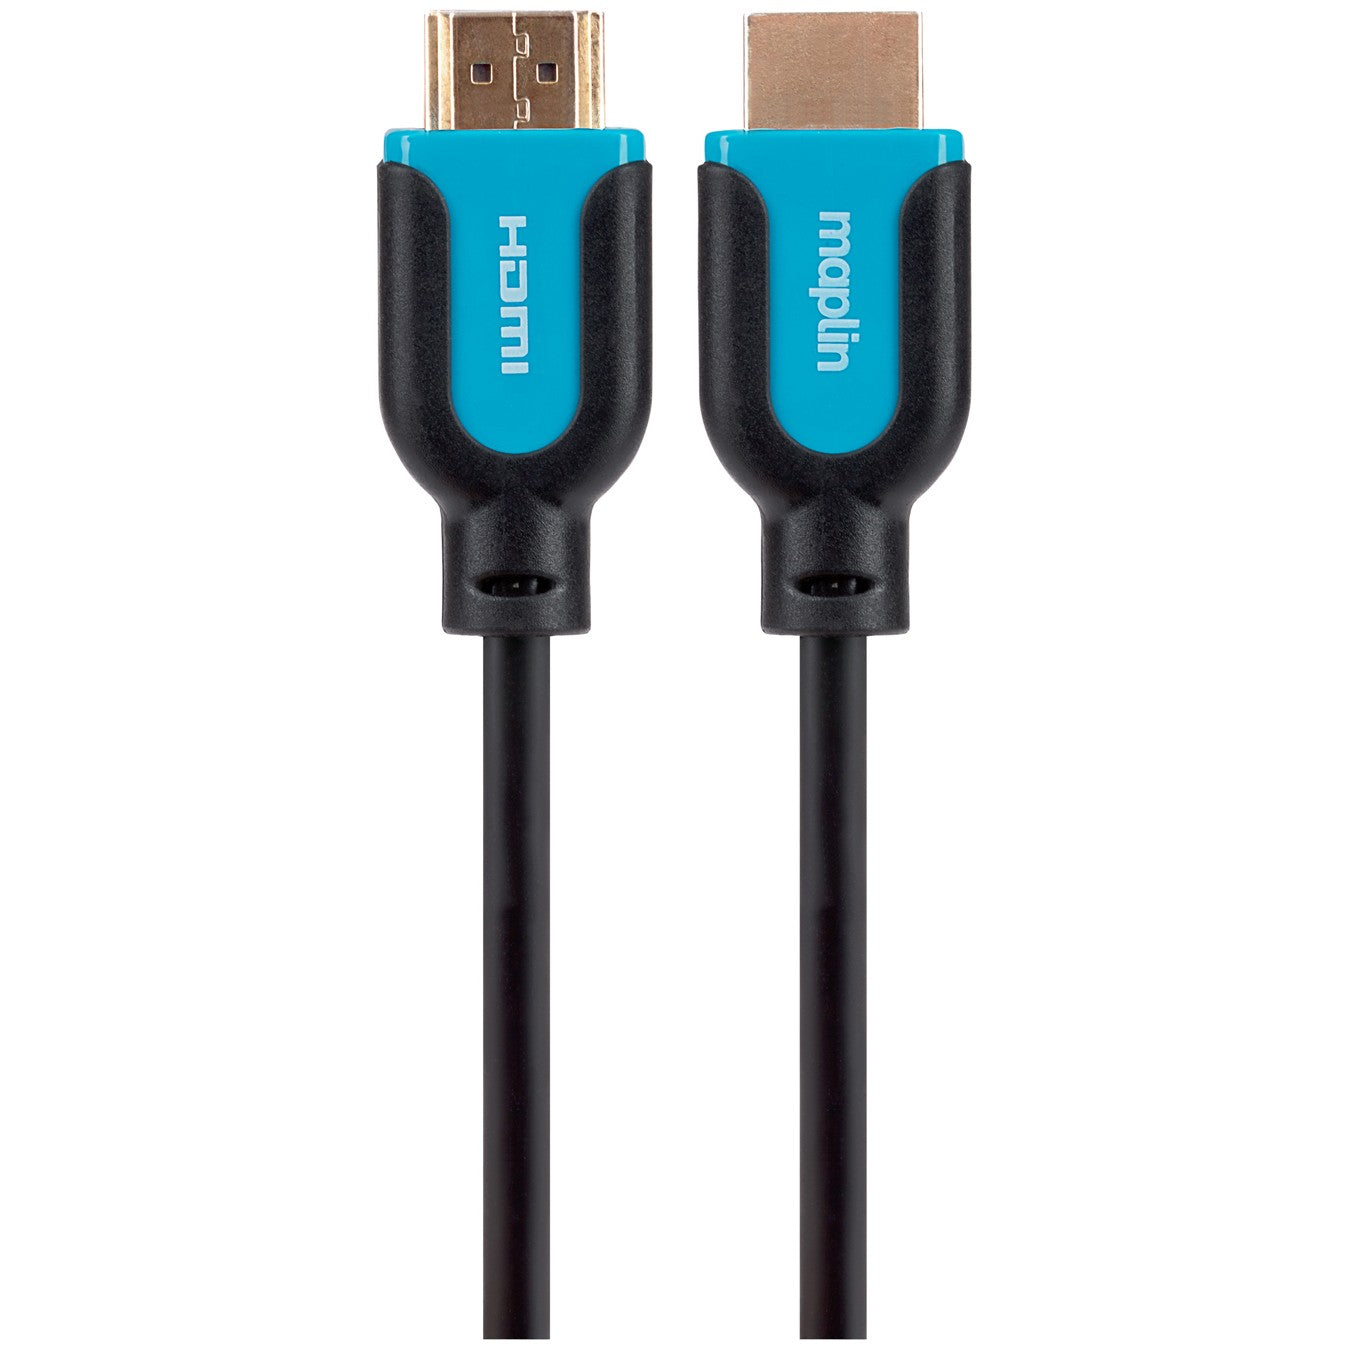 Maplin HDMI to HDMI 4K Ultra HD 30Hz Cable with Gold Connectors - Black